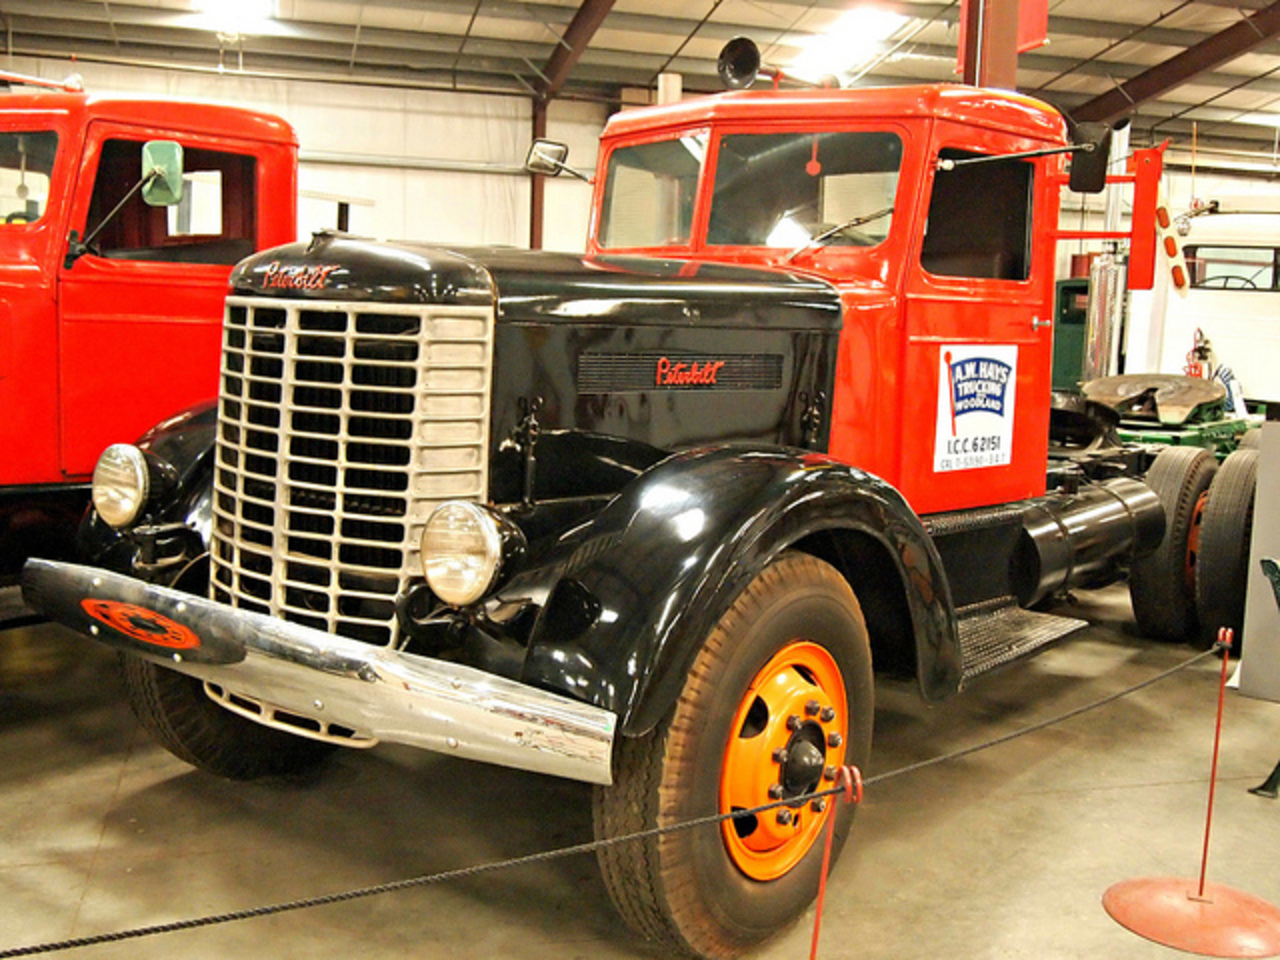 Flickr: The Vintage Old Classic American Heavy Duty Trucks- no ...